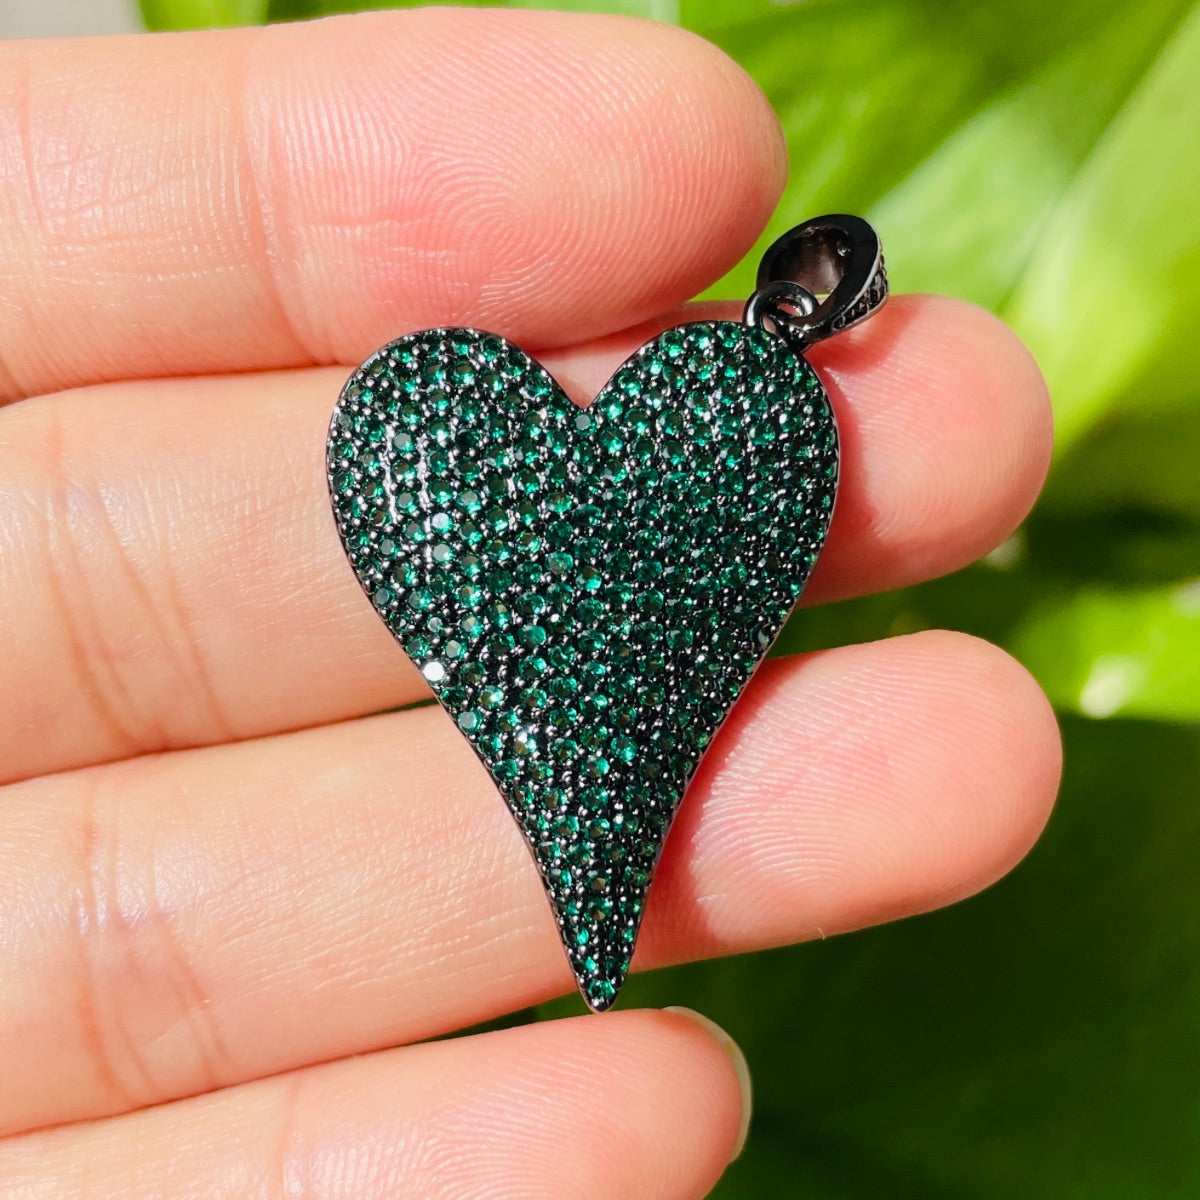 5pcs/lot 40*23.5mm CZ Paved Fuchsia Green Blue Heart Charms Green on Black CZ Paved Charms Colorful Zirconia Hearts New Charms Arrivals Charms Beads Beyond